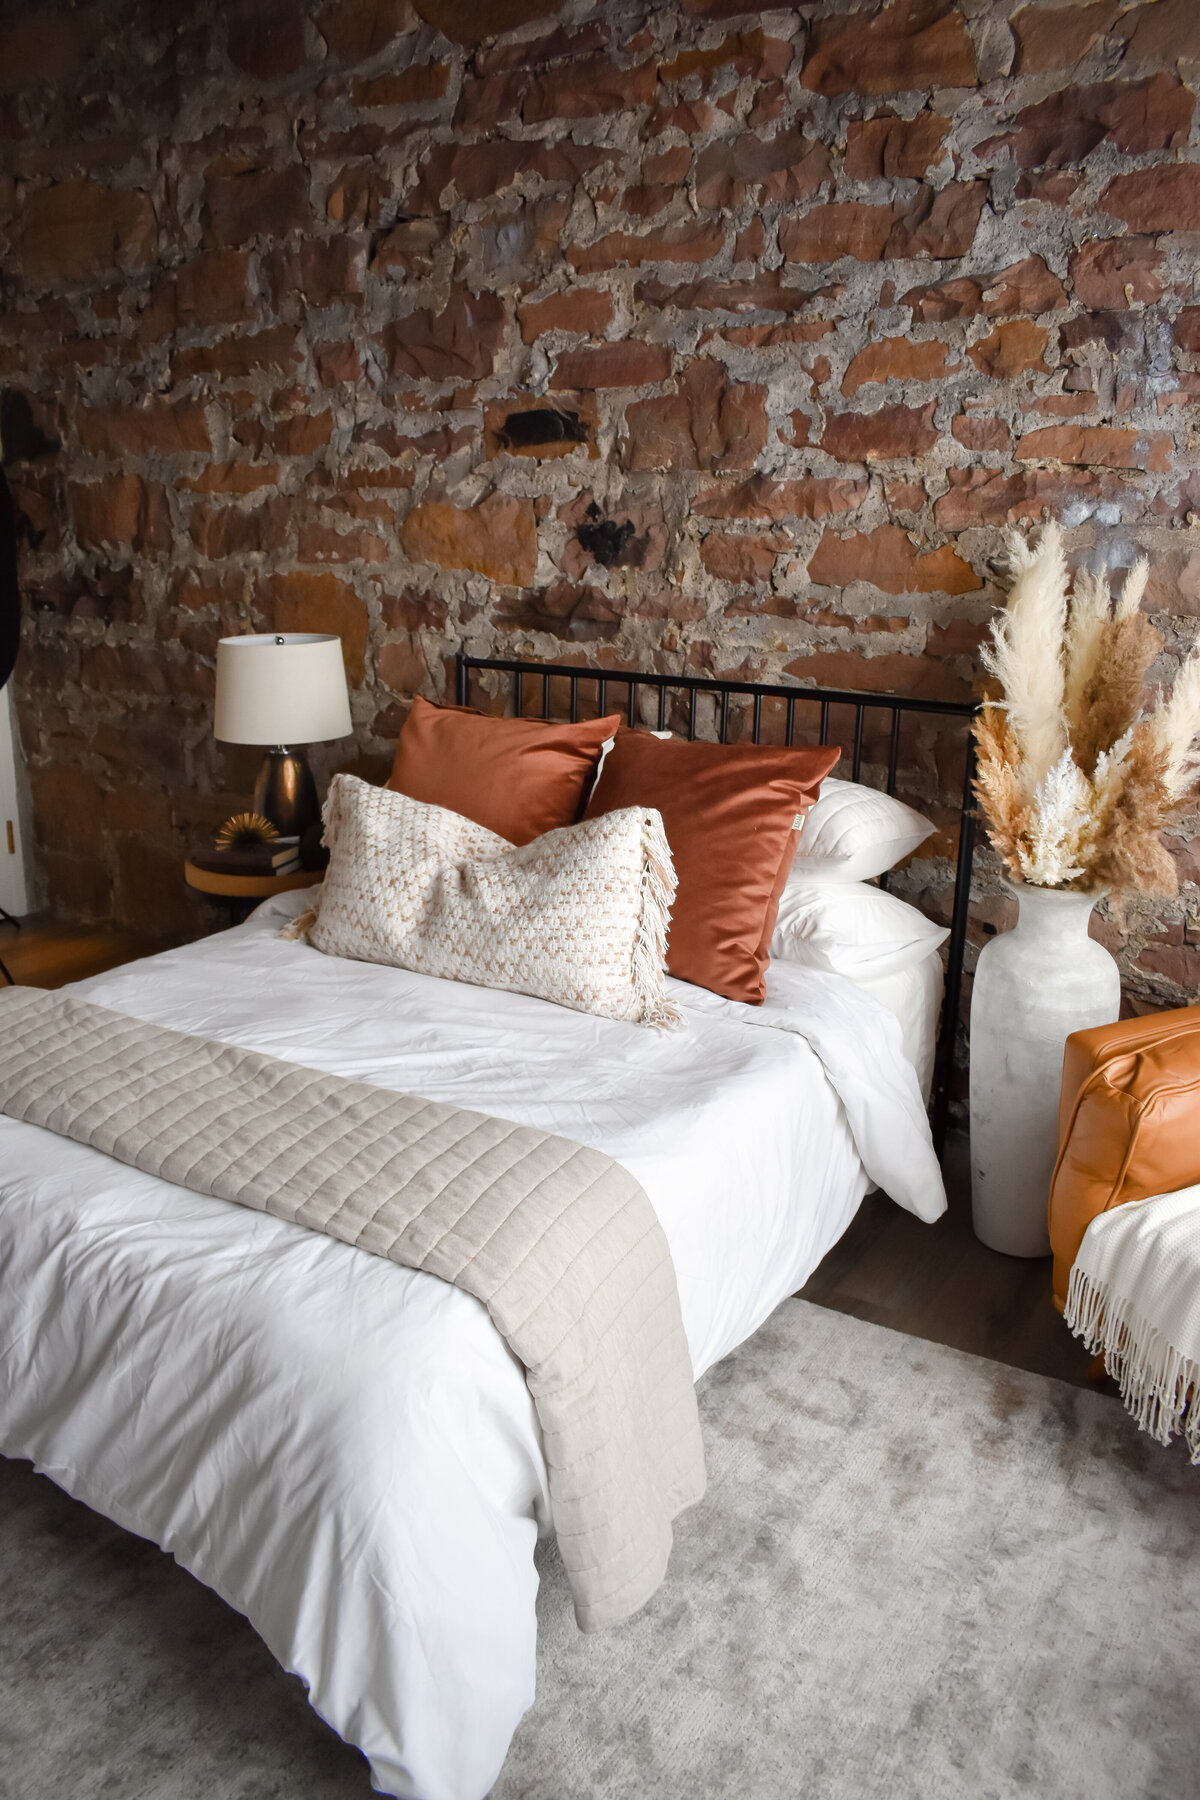 A bed with a white duvet and white and burnt orange throw pillows